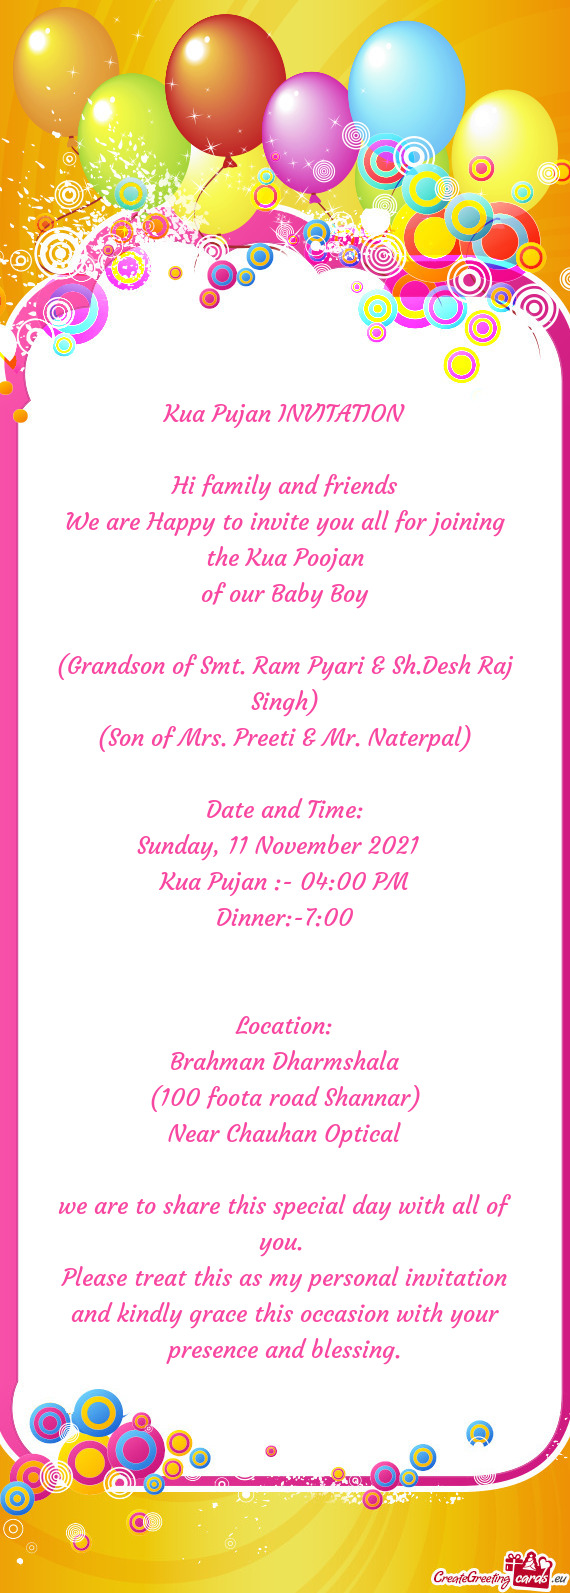 We are Happy to invite you all for joining the Kua Poojan